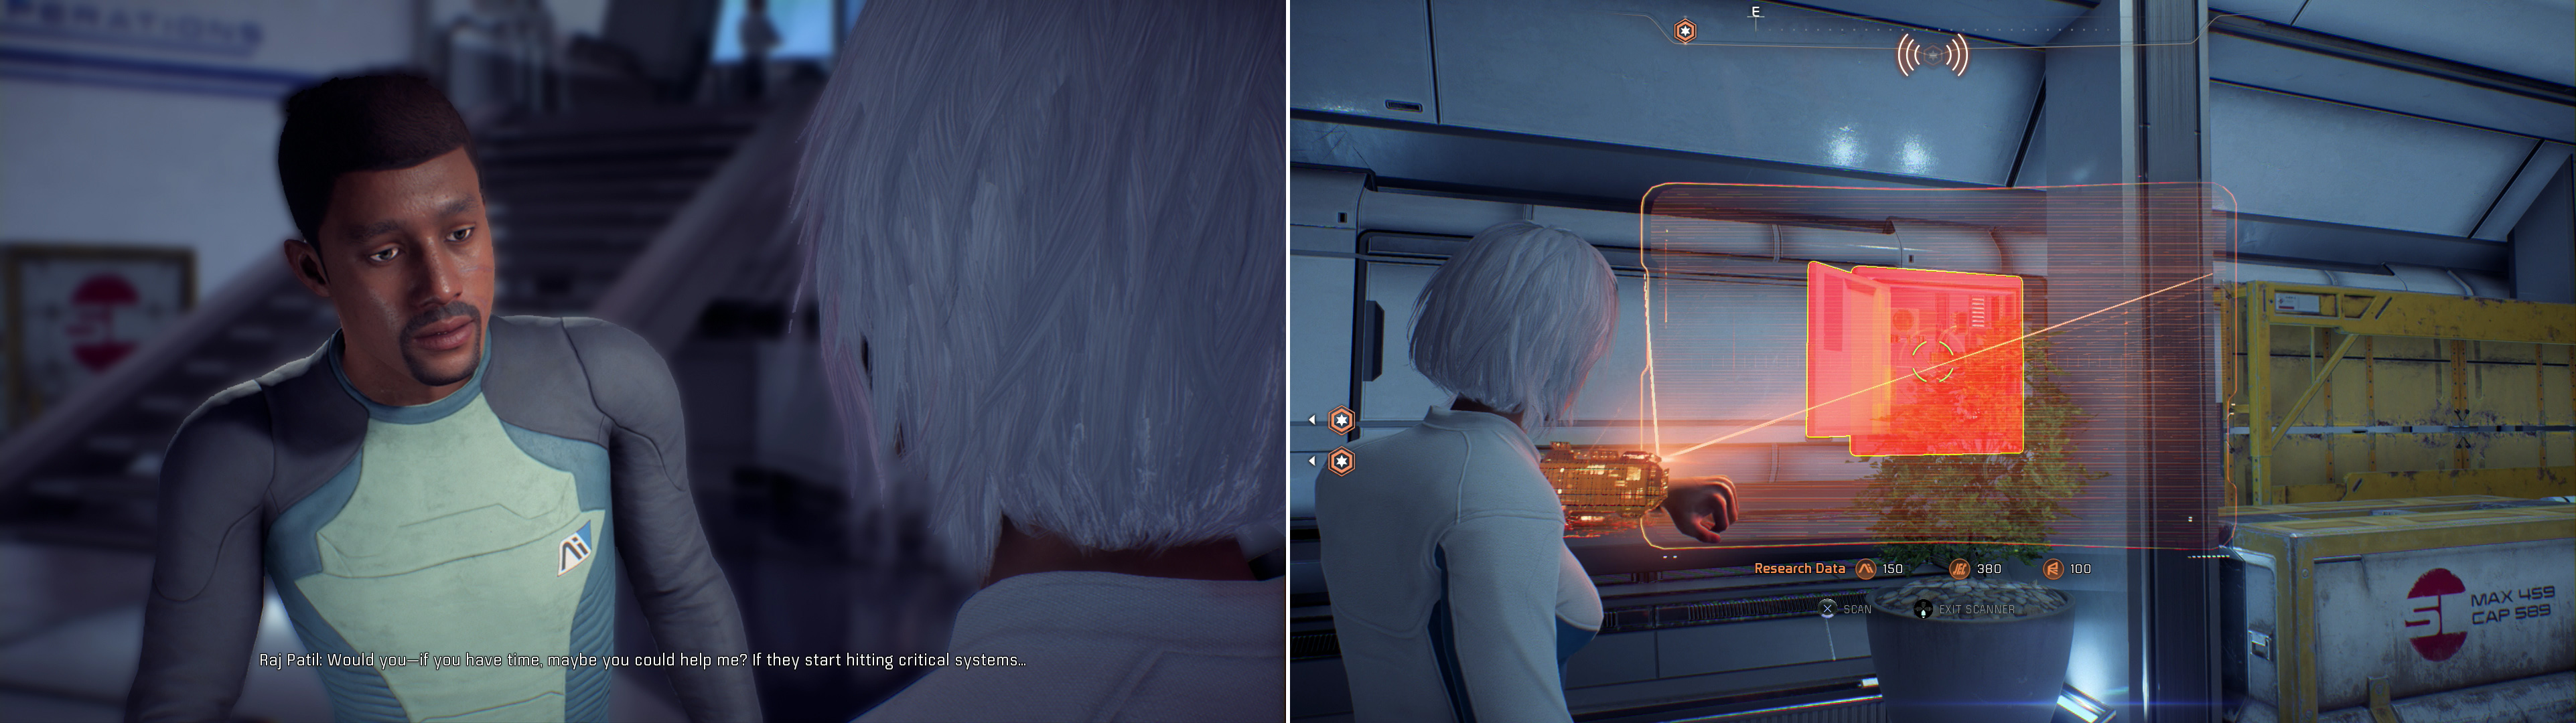 After a surprising explosion on the Nexus, talk to the engineer involved, who suspects sabotage! (left) Scan the suspicious panels (right) to confirm his suspicions.